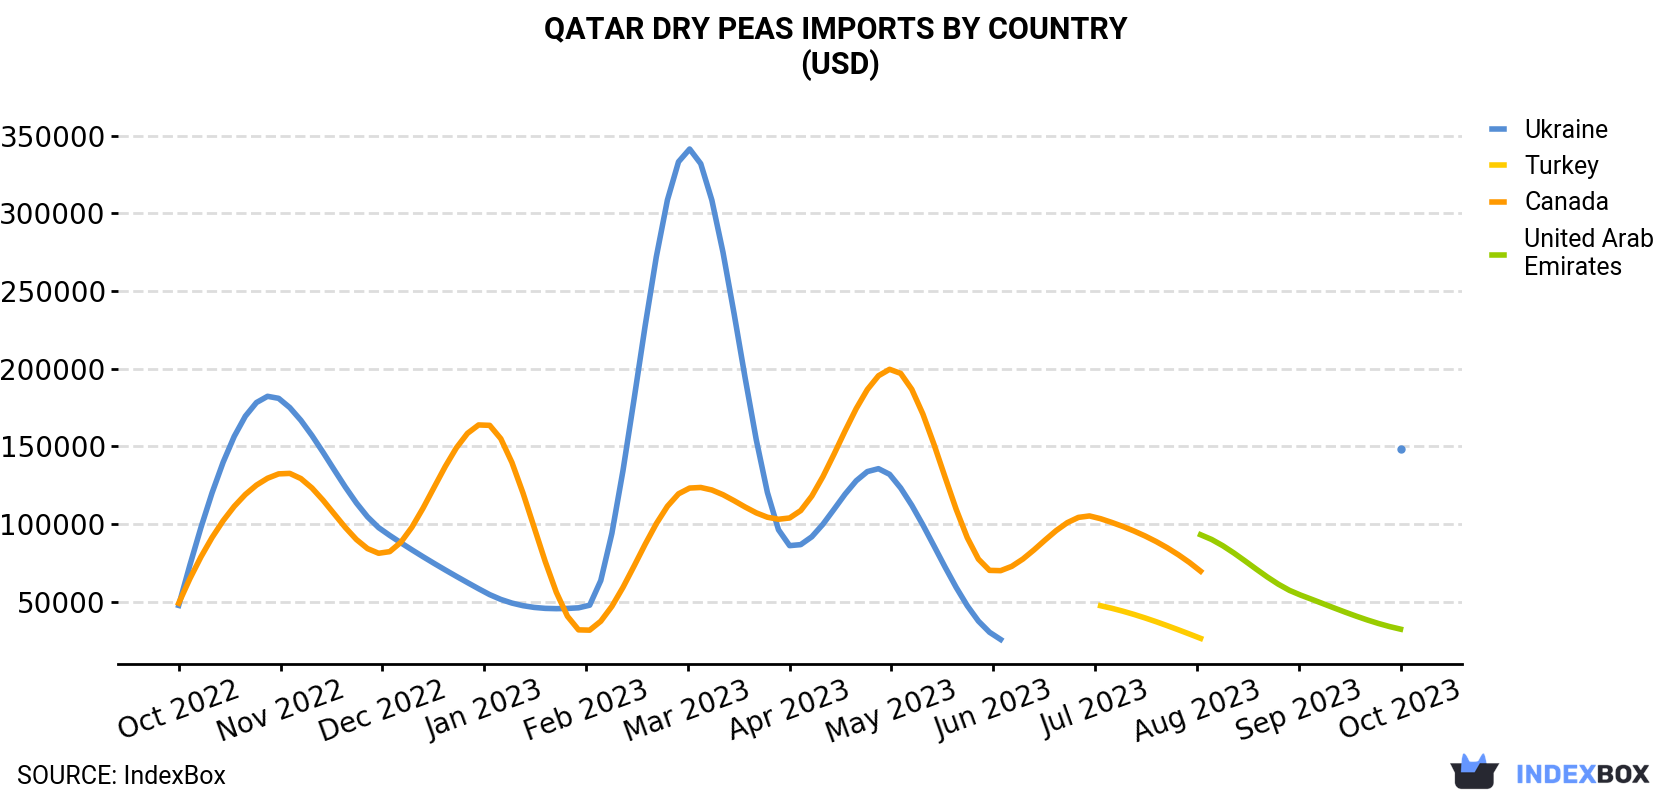 Qatar Dry Peas Imports By Country (USD)